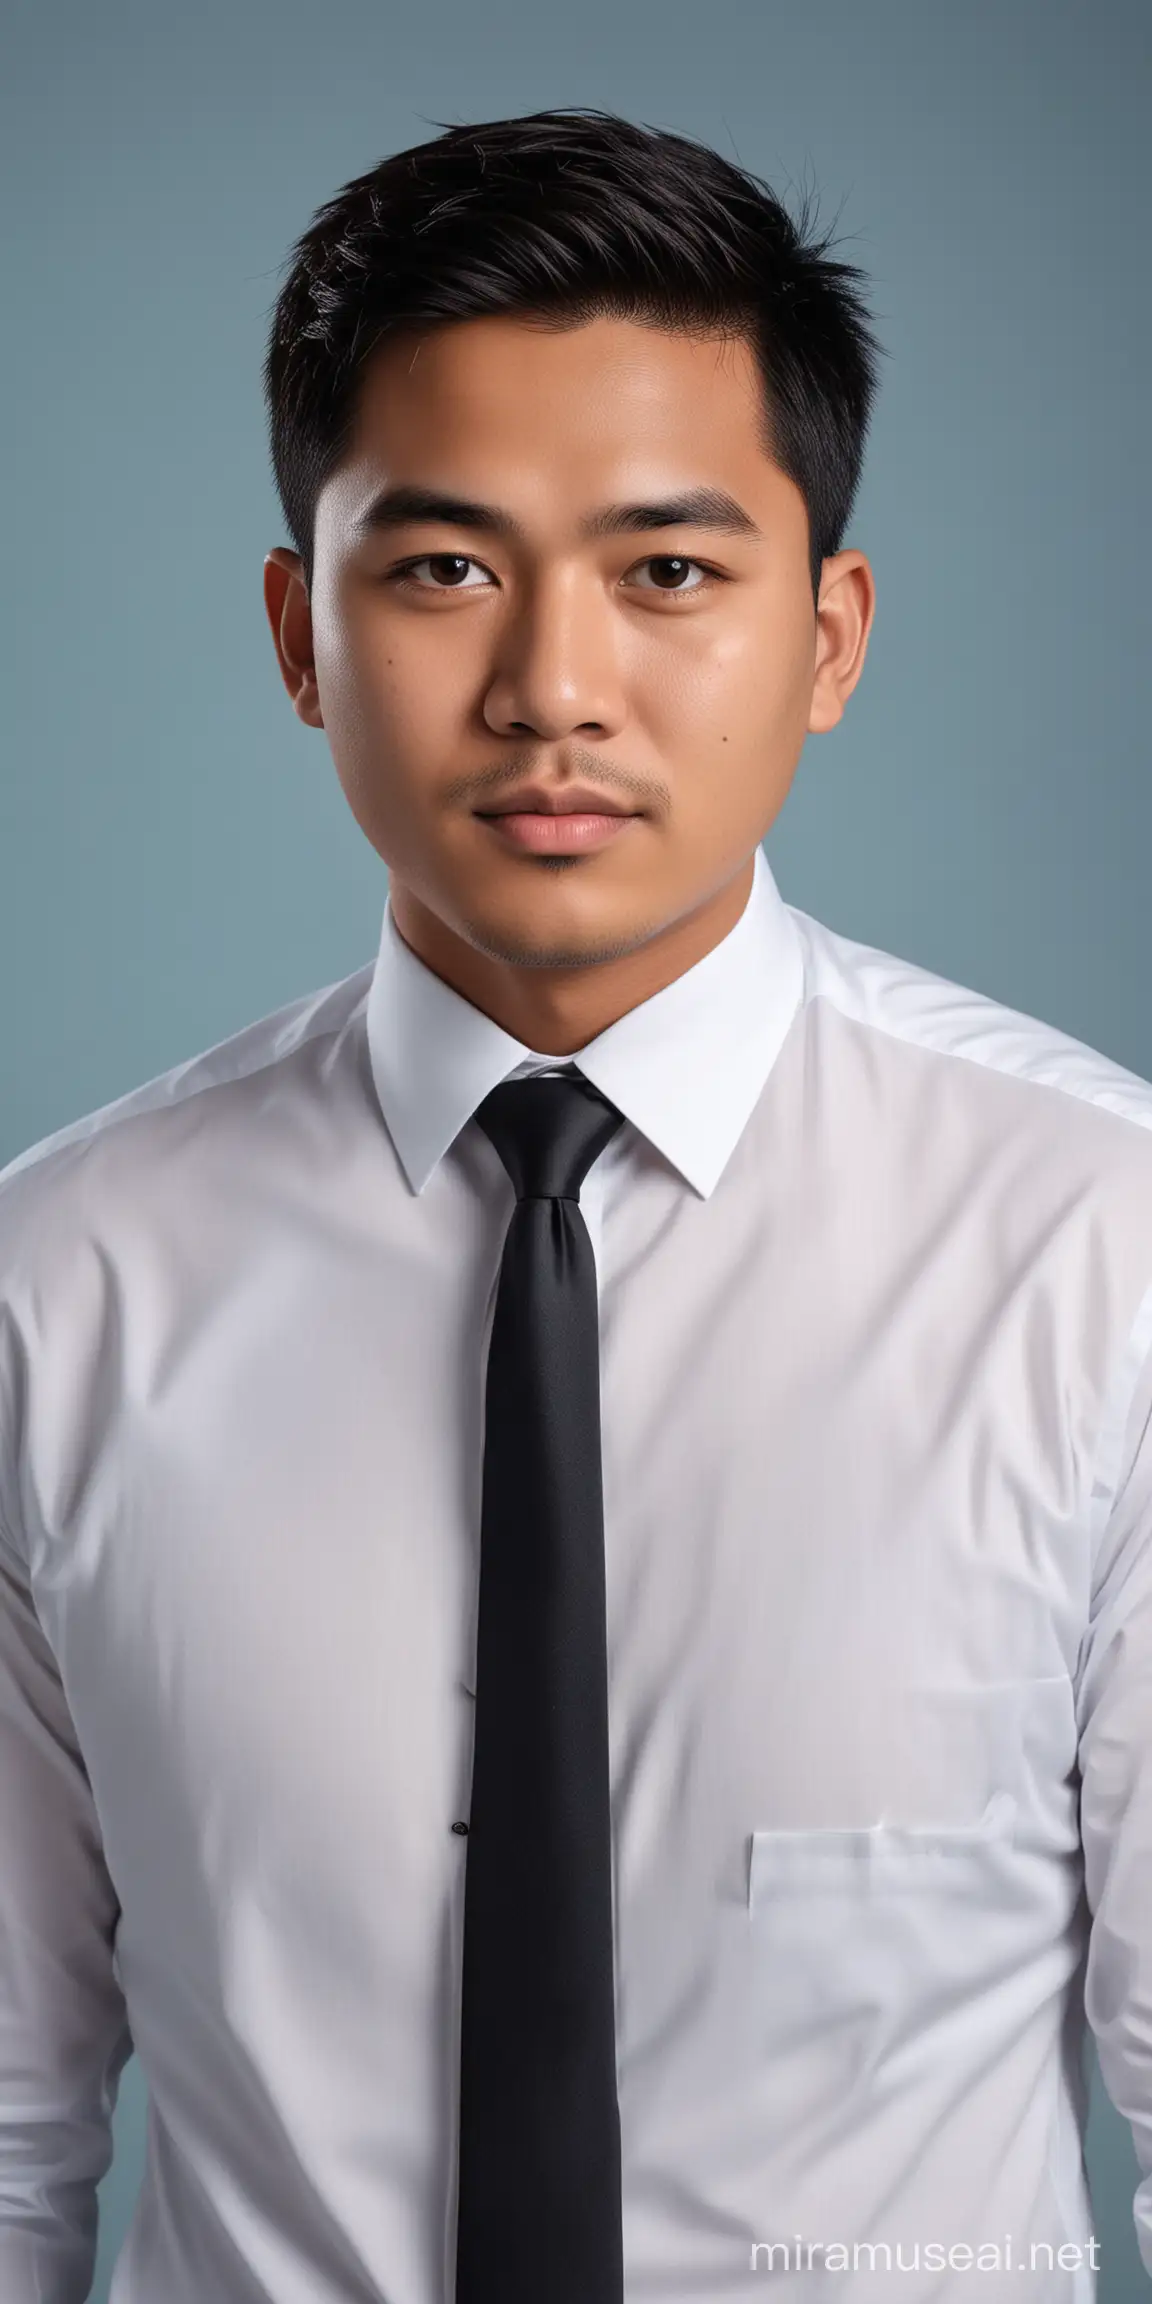 Professional formal photograph, Indonesian man 26 year old, short straight hair style, round face, detailed faces, chubby, wearing man white shirt, black tie, SKY BLUE colour as background, body facing forward, UHD.